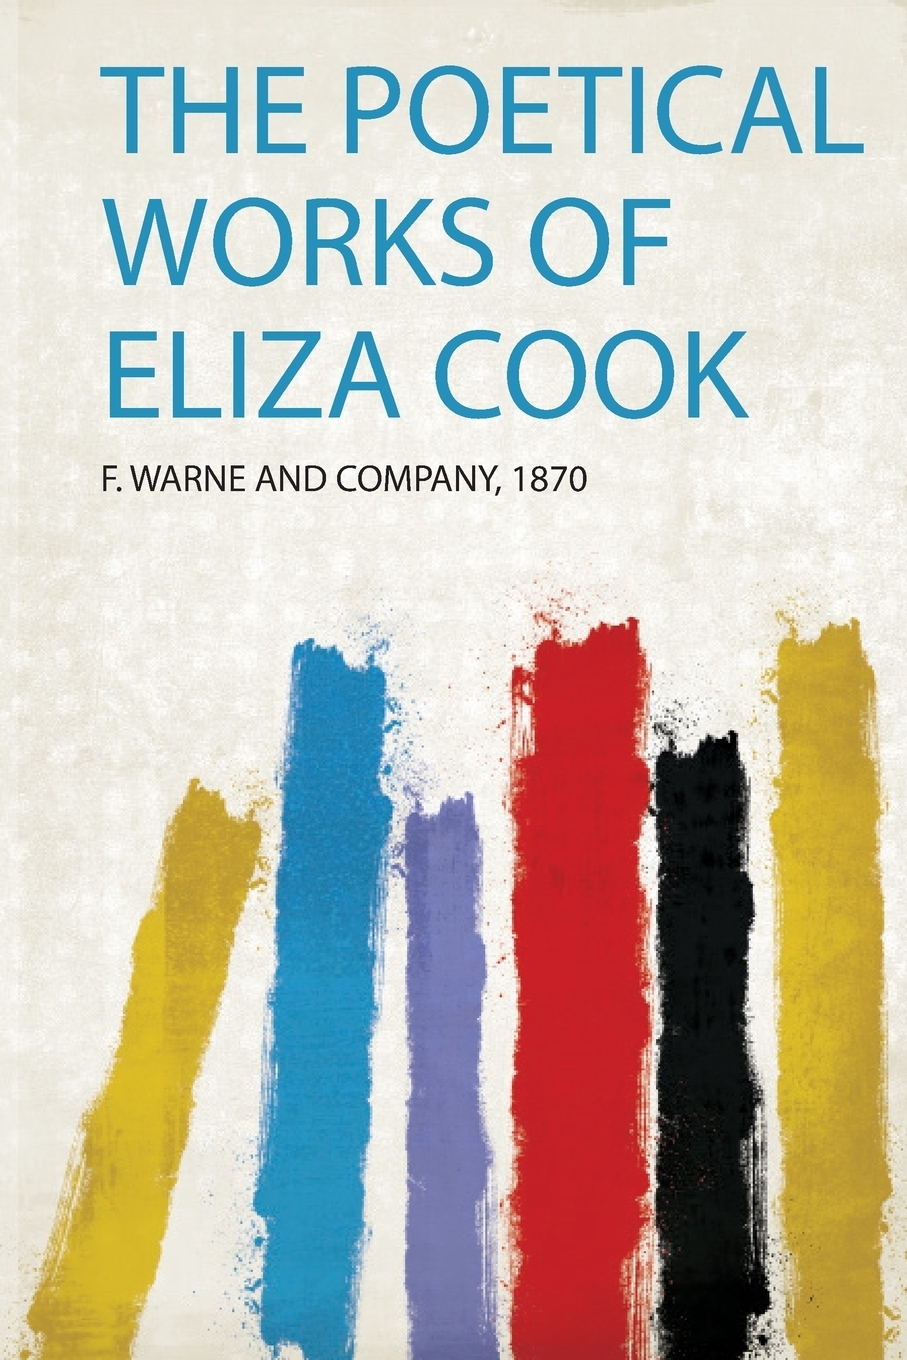 The Poetical Works of Eliza Cook